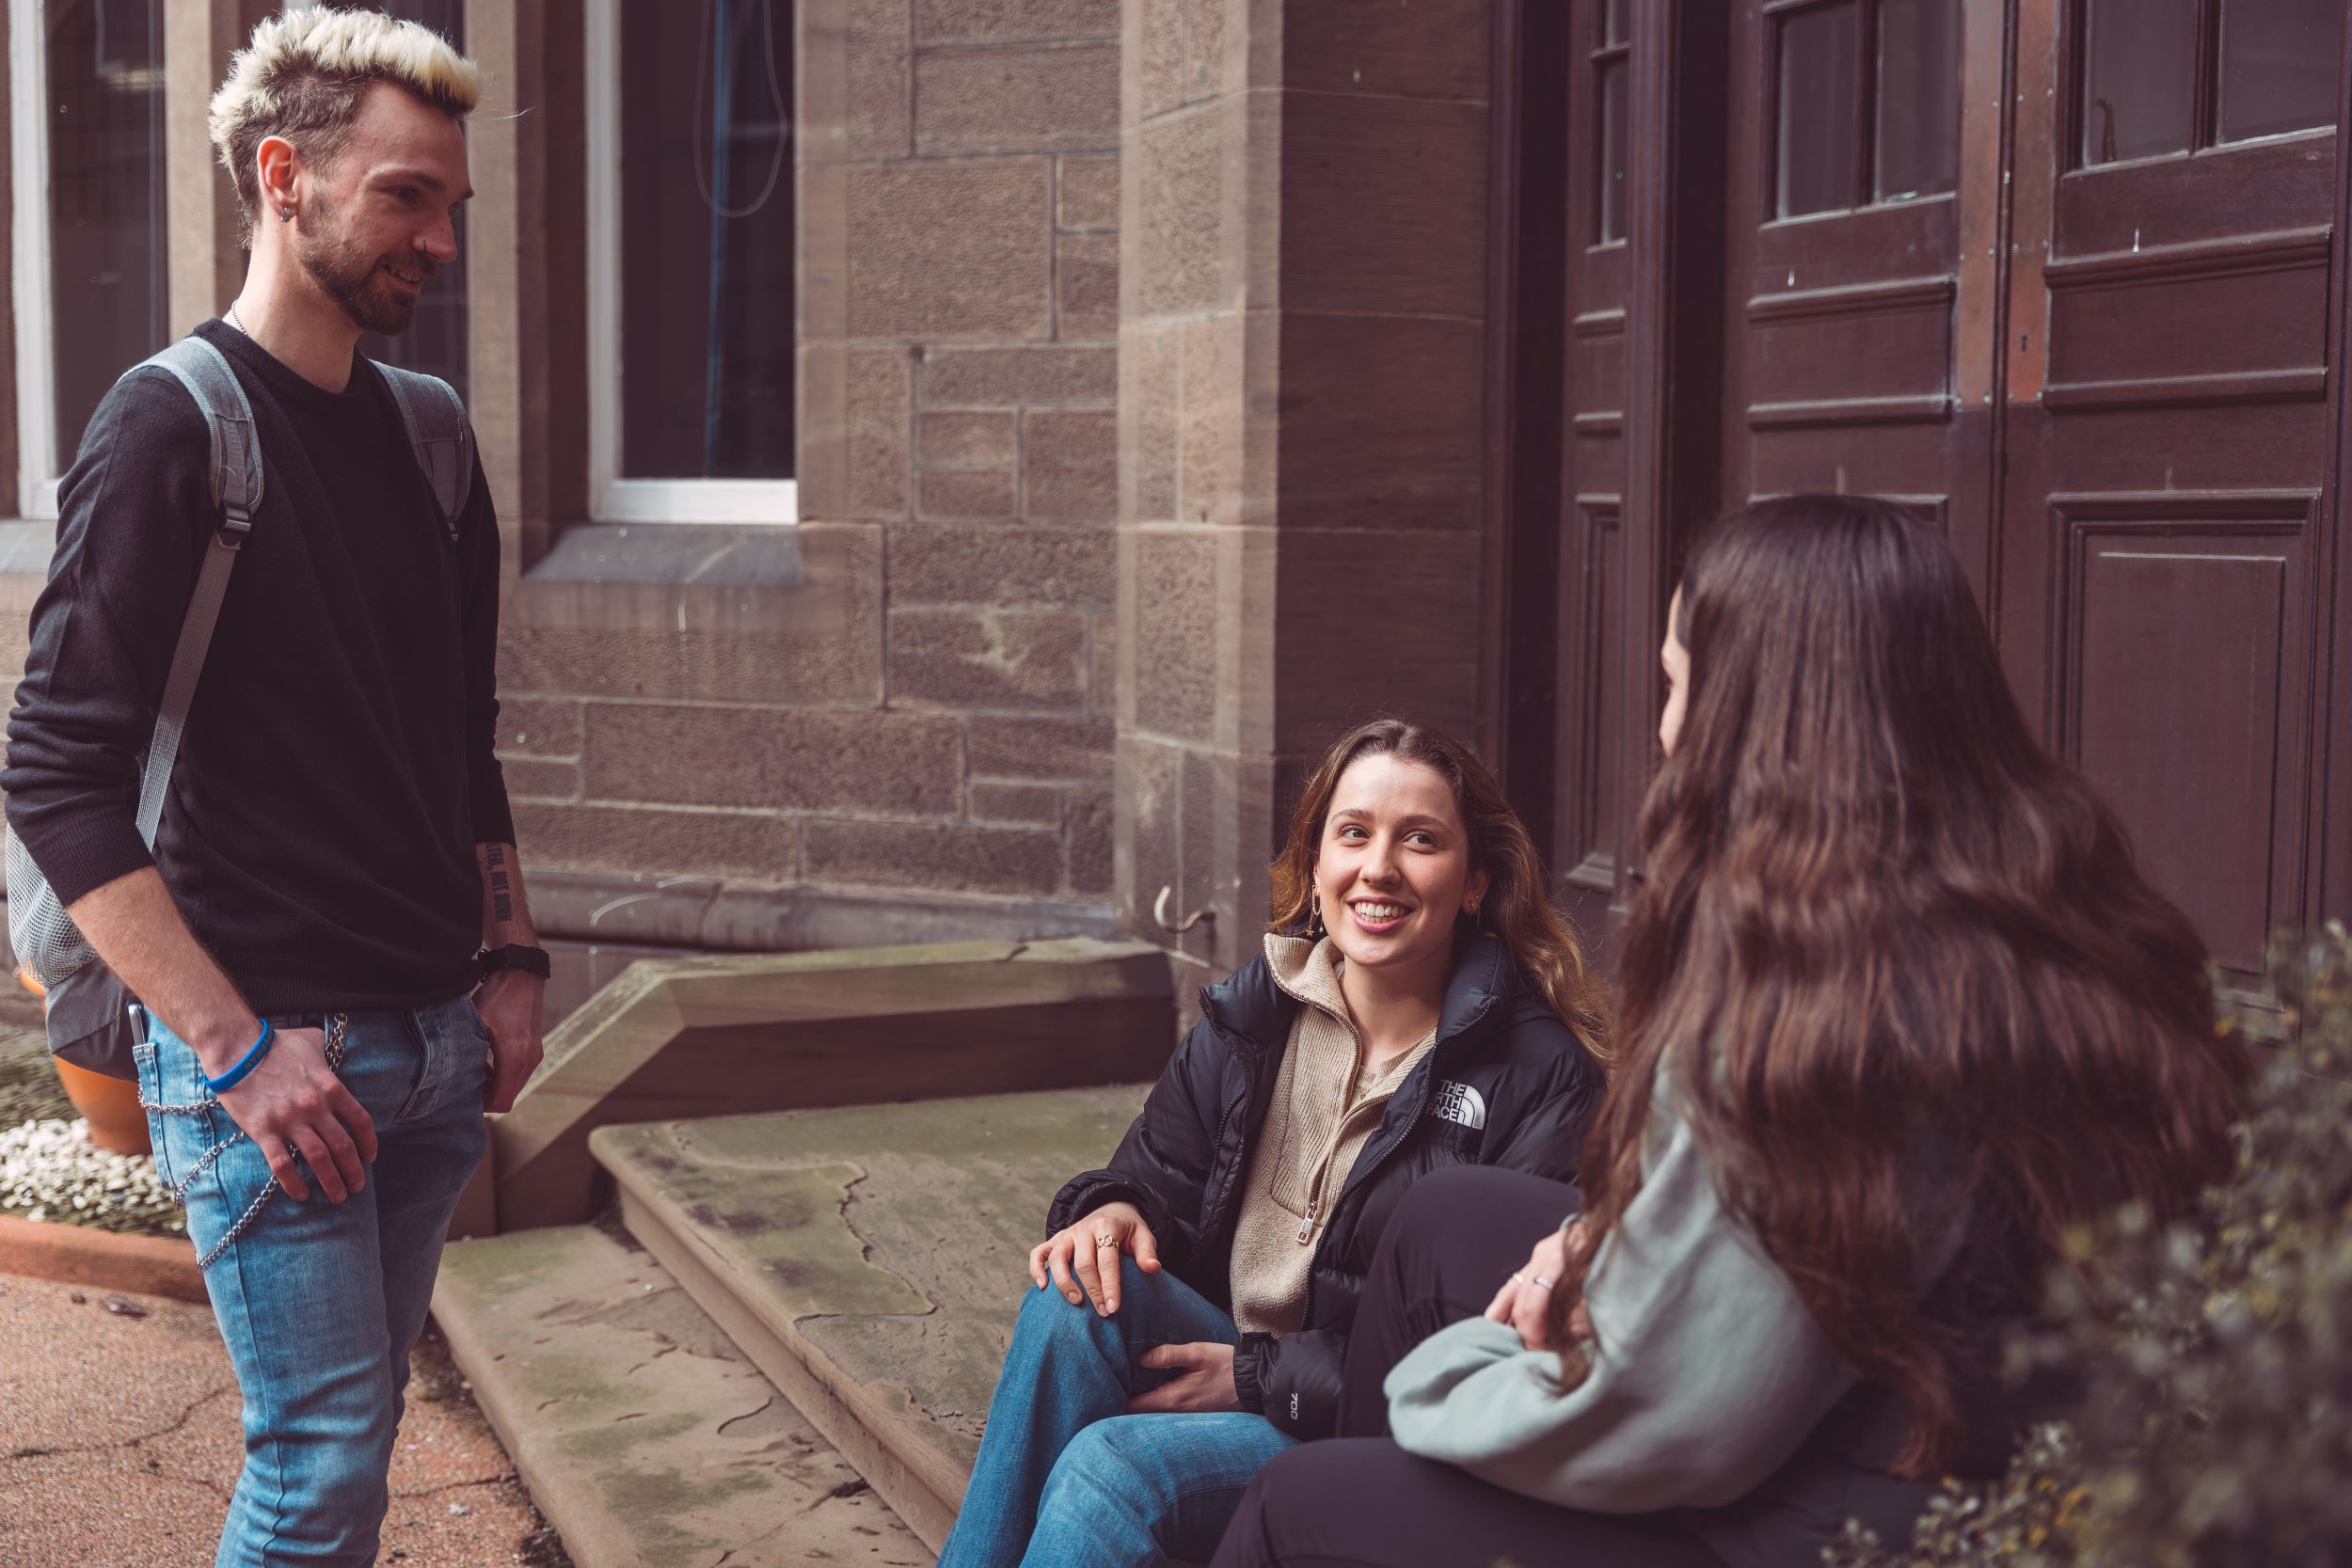 Three Students talking outside, two sitting on steps